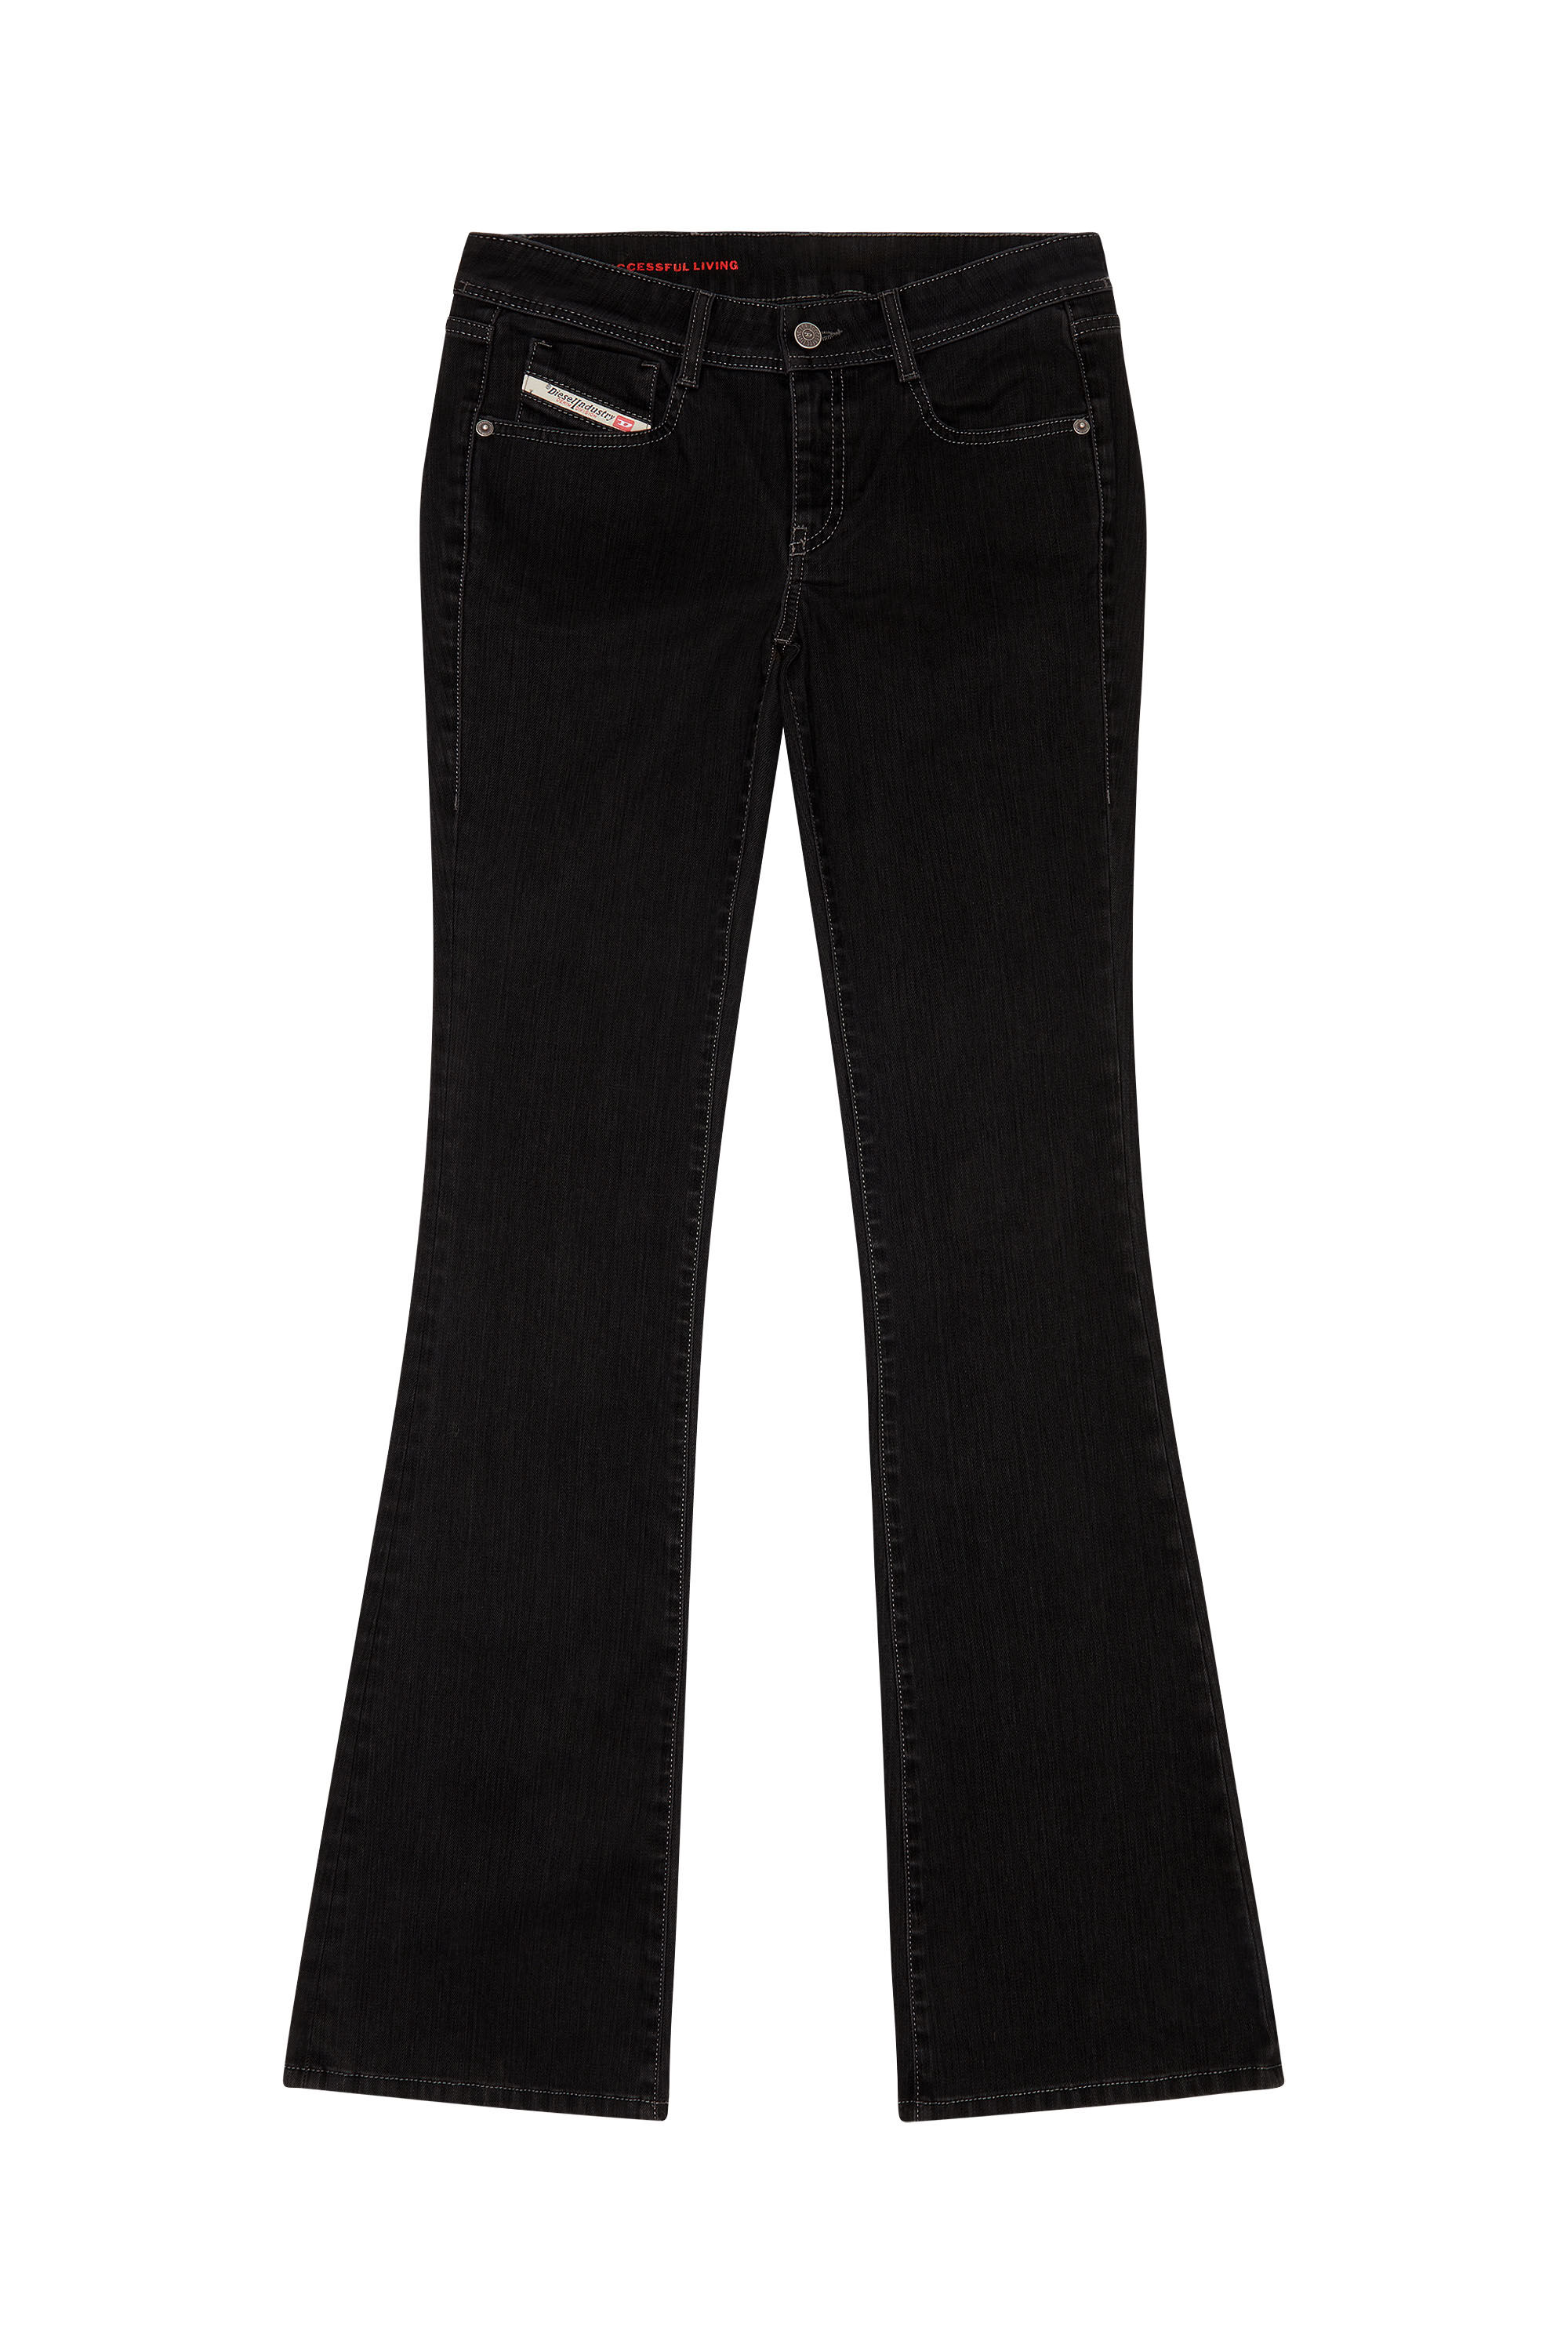 Diesel - 1969 D-Ebbey 0IHAO Bootcut and Flare Jeans,  - Image 2